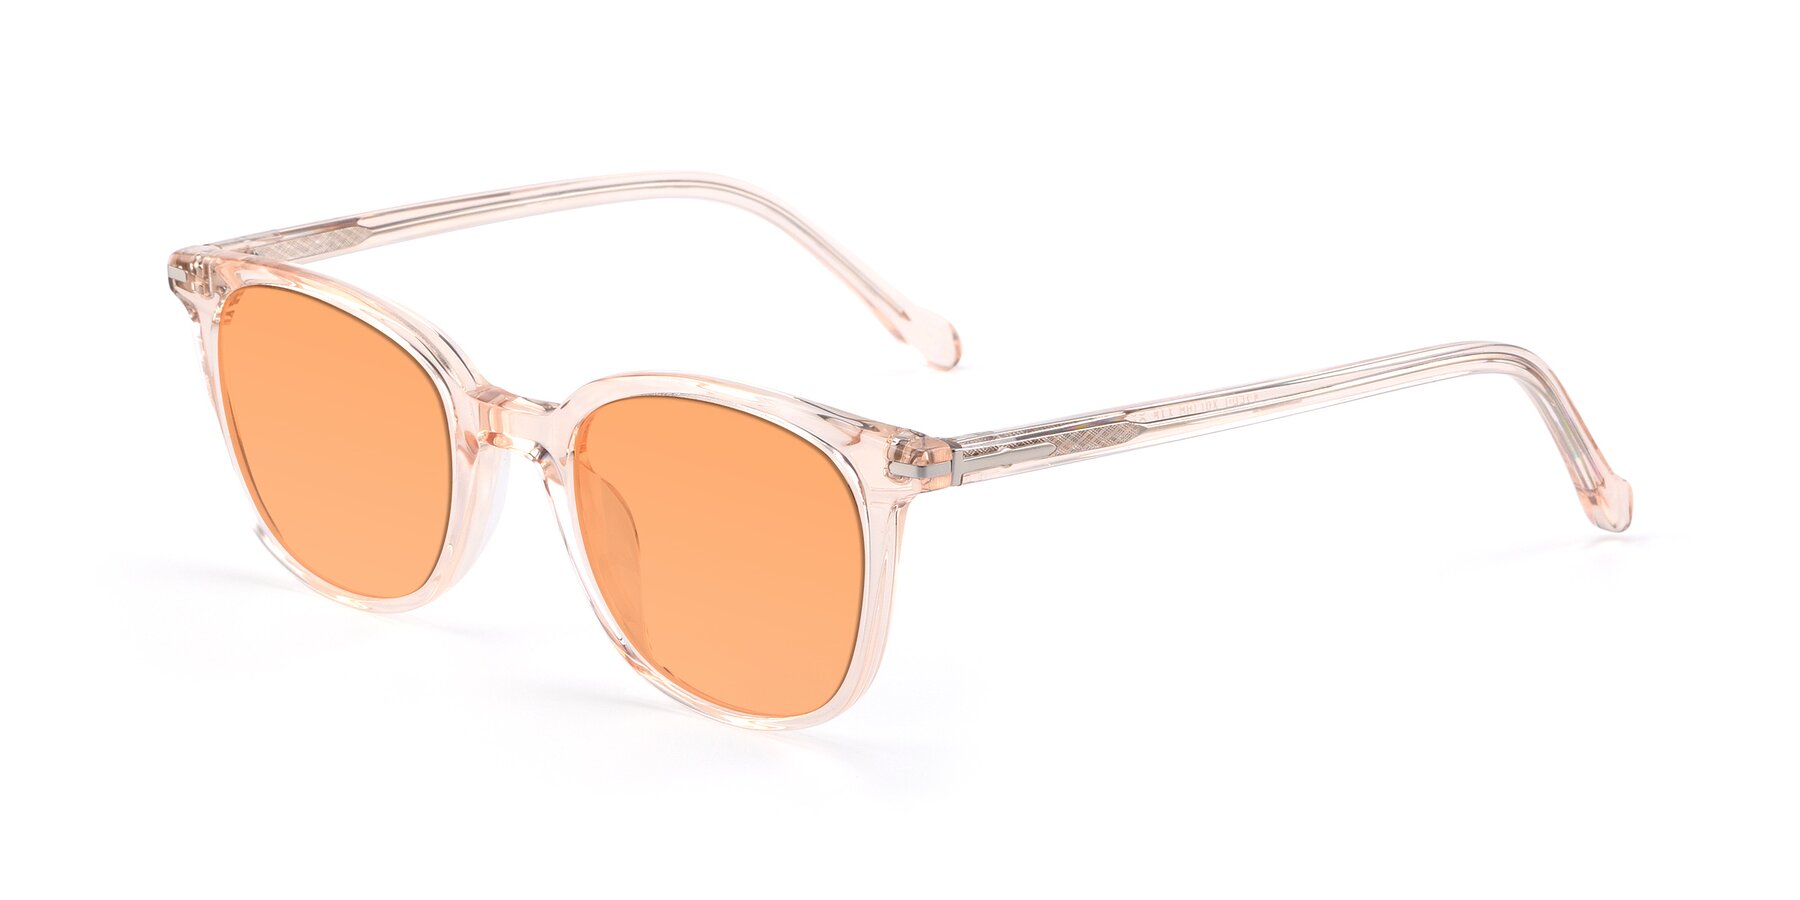 Angle of 17562 in Transparent Pink with Medium Orange Tinted Lenses